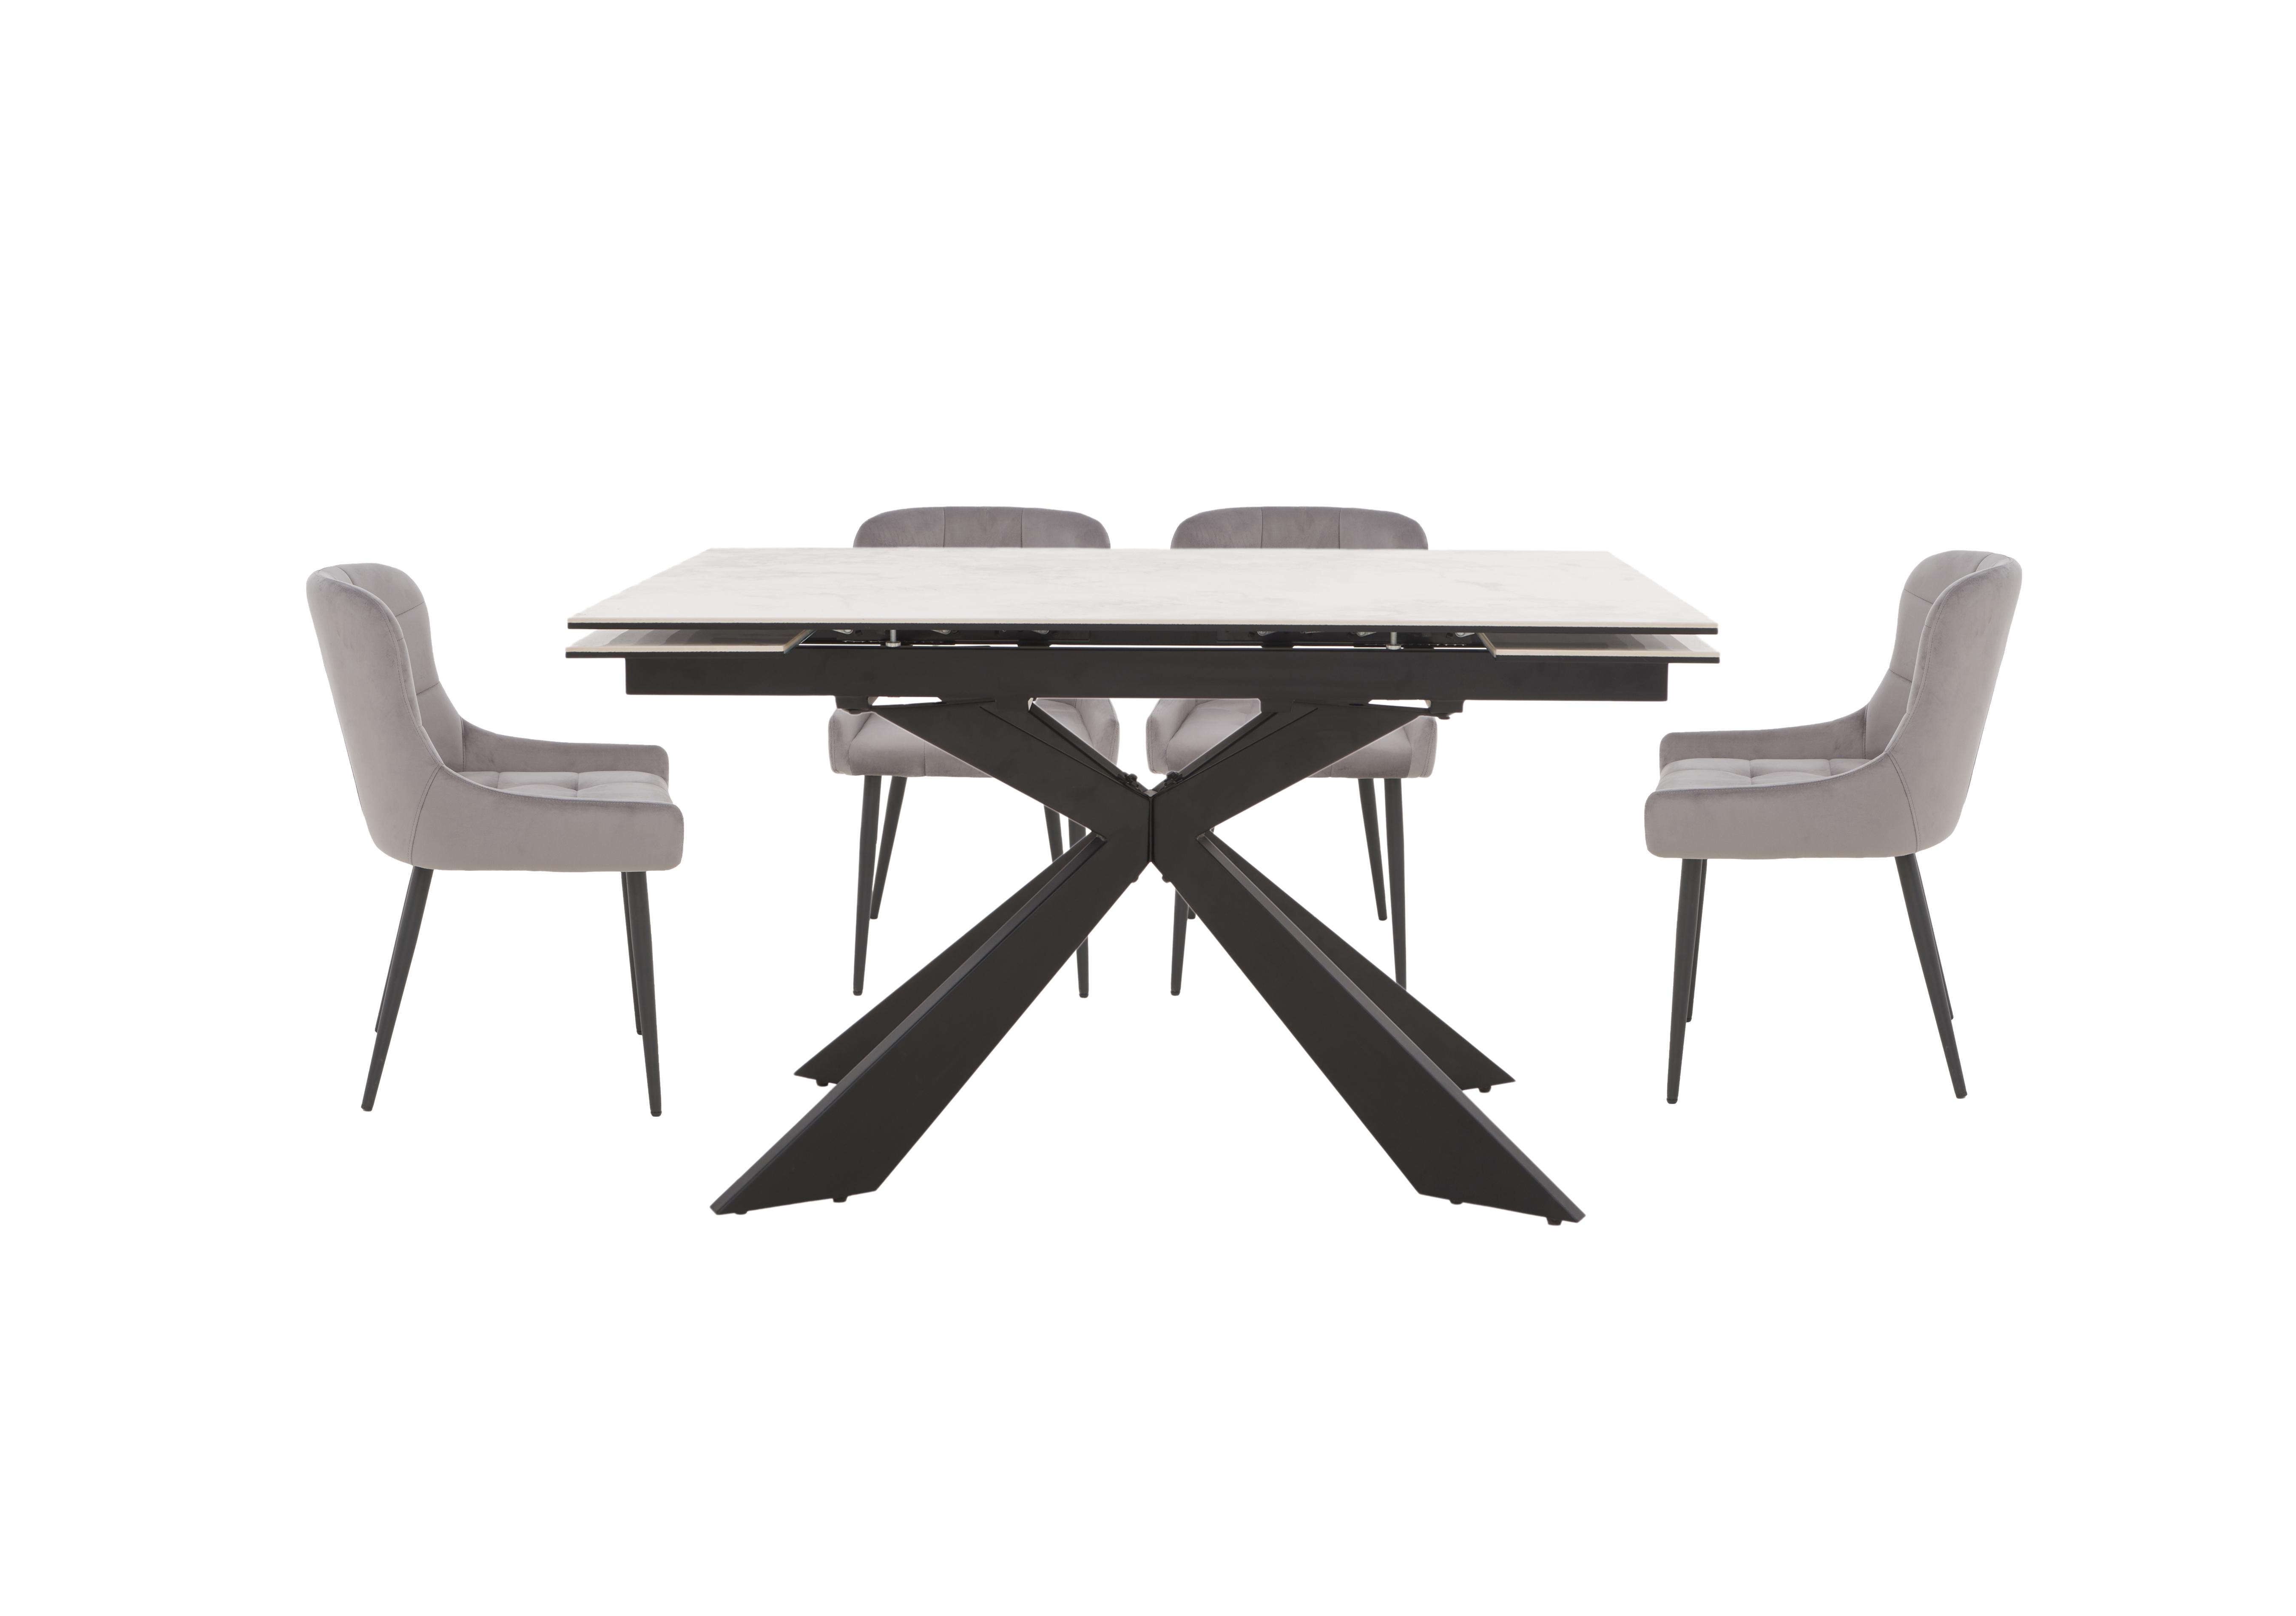 Kos Extending Dining Table with 4 Velvet Dining Chairs Dining Set in Granite on Furniture Village